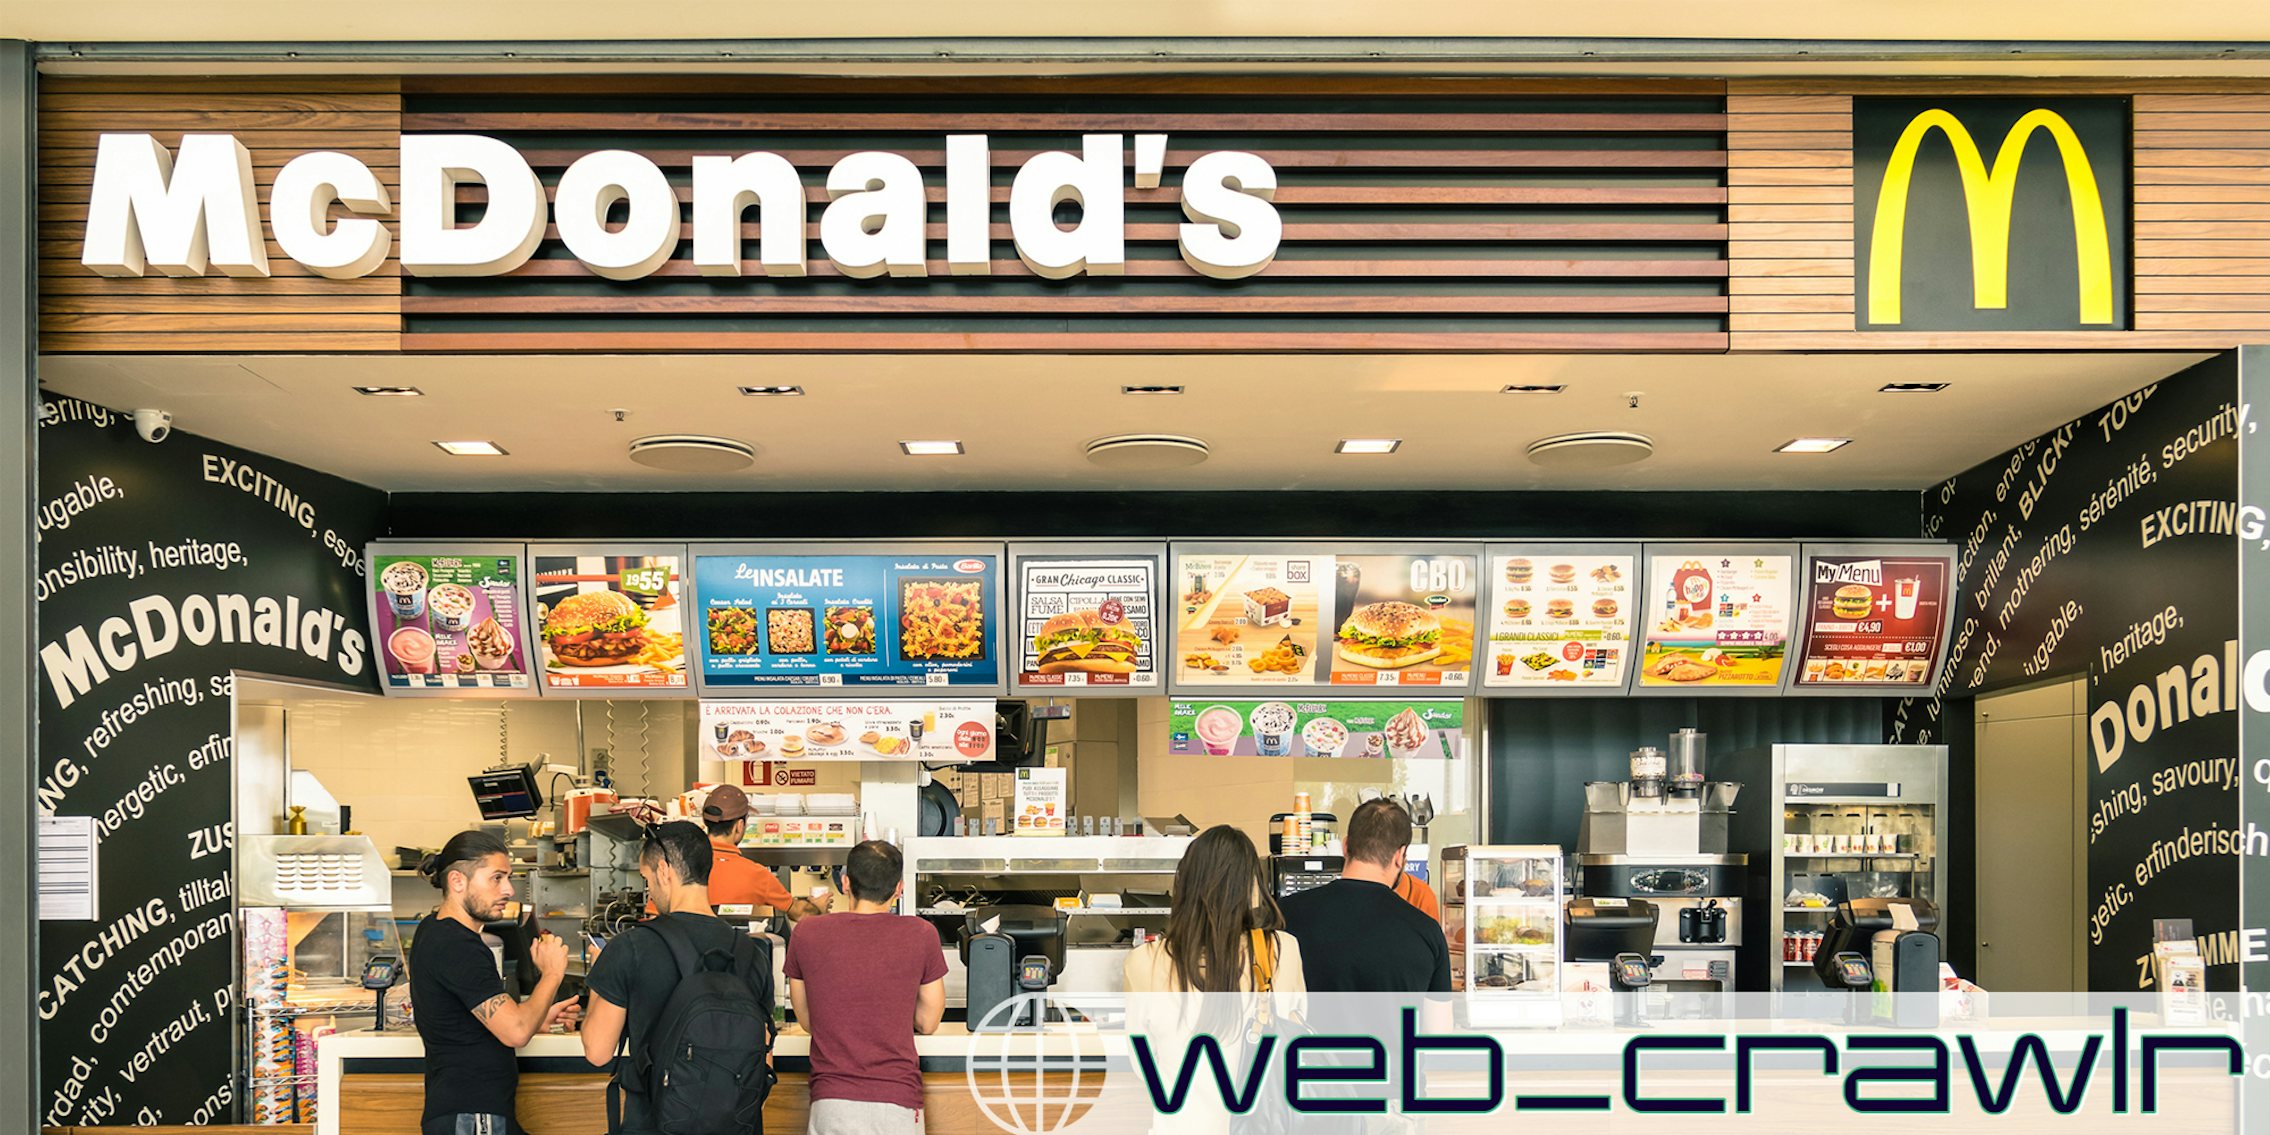 people waiting for the food service at McDonald's desk in the shopping mall